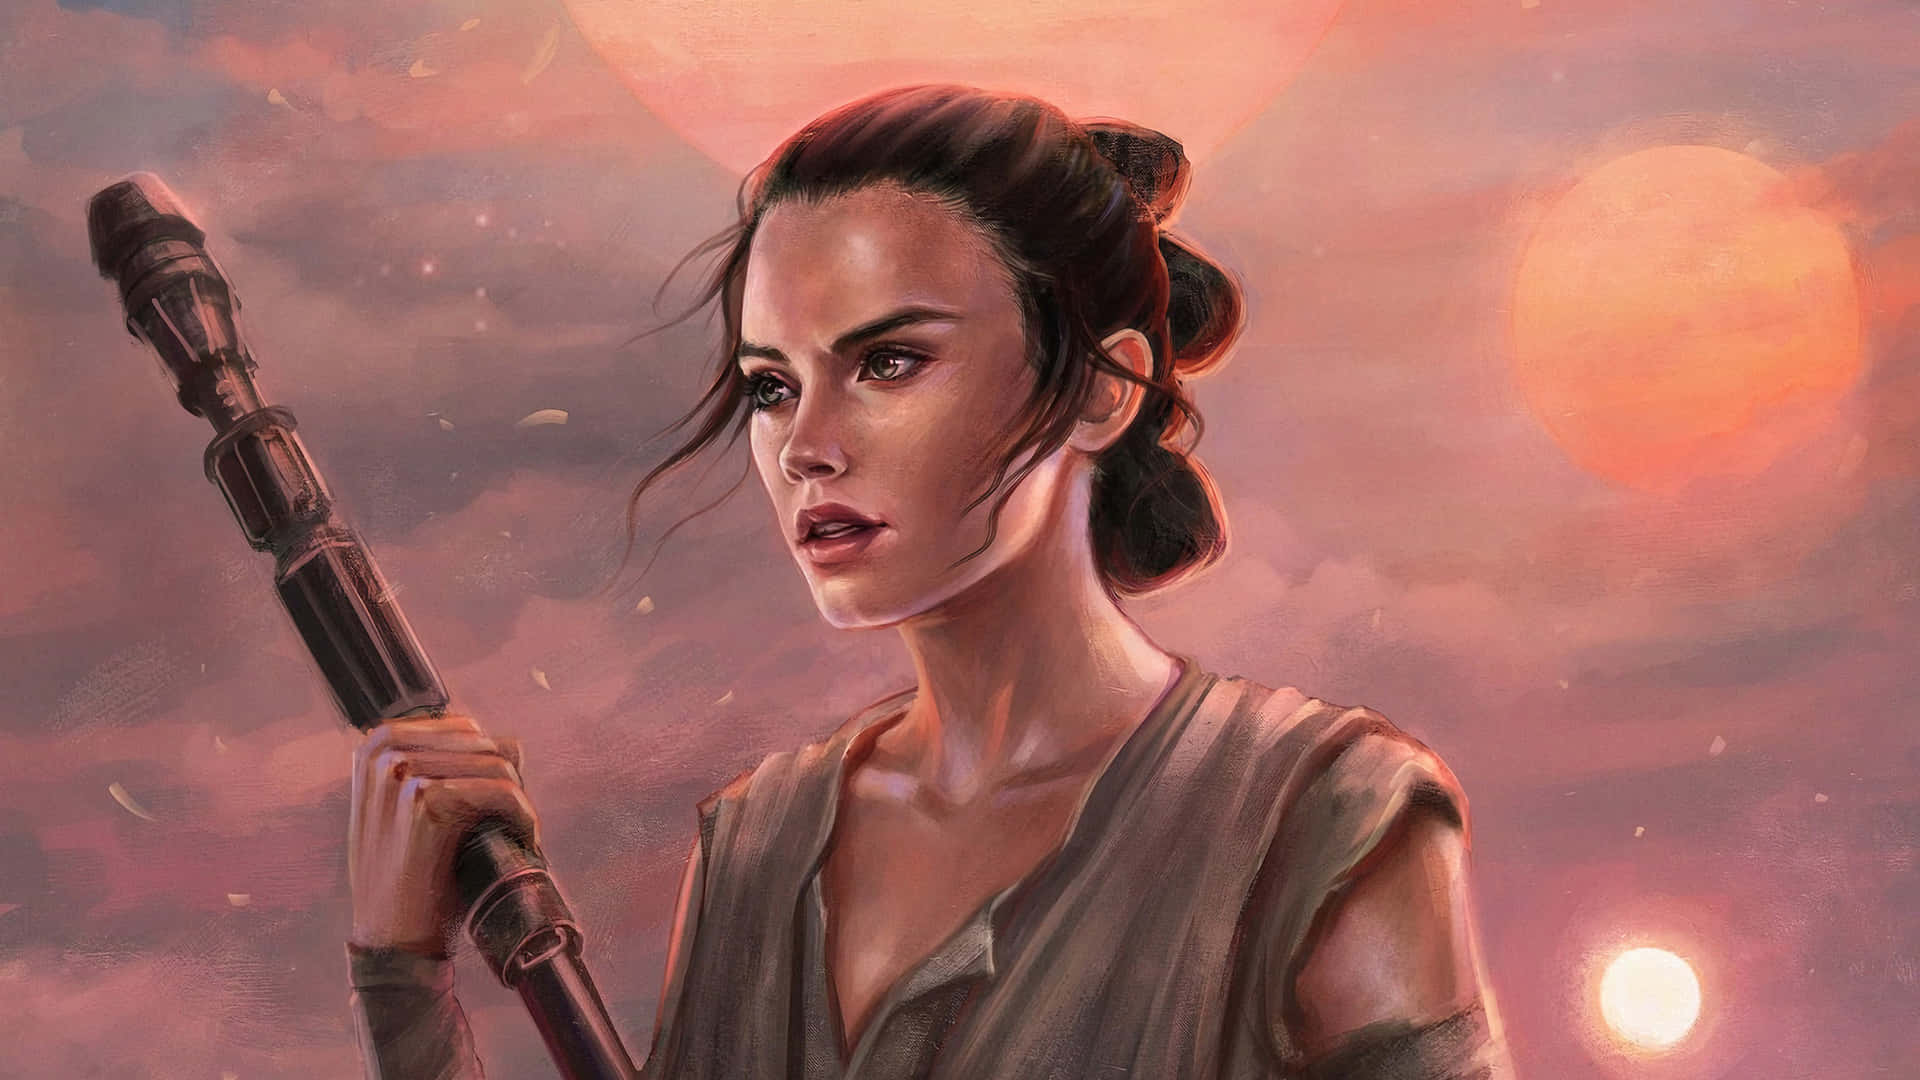 Rey Takes On the Challenge in Star Wars Wallpaper